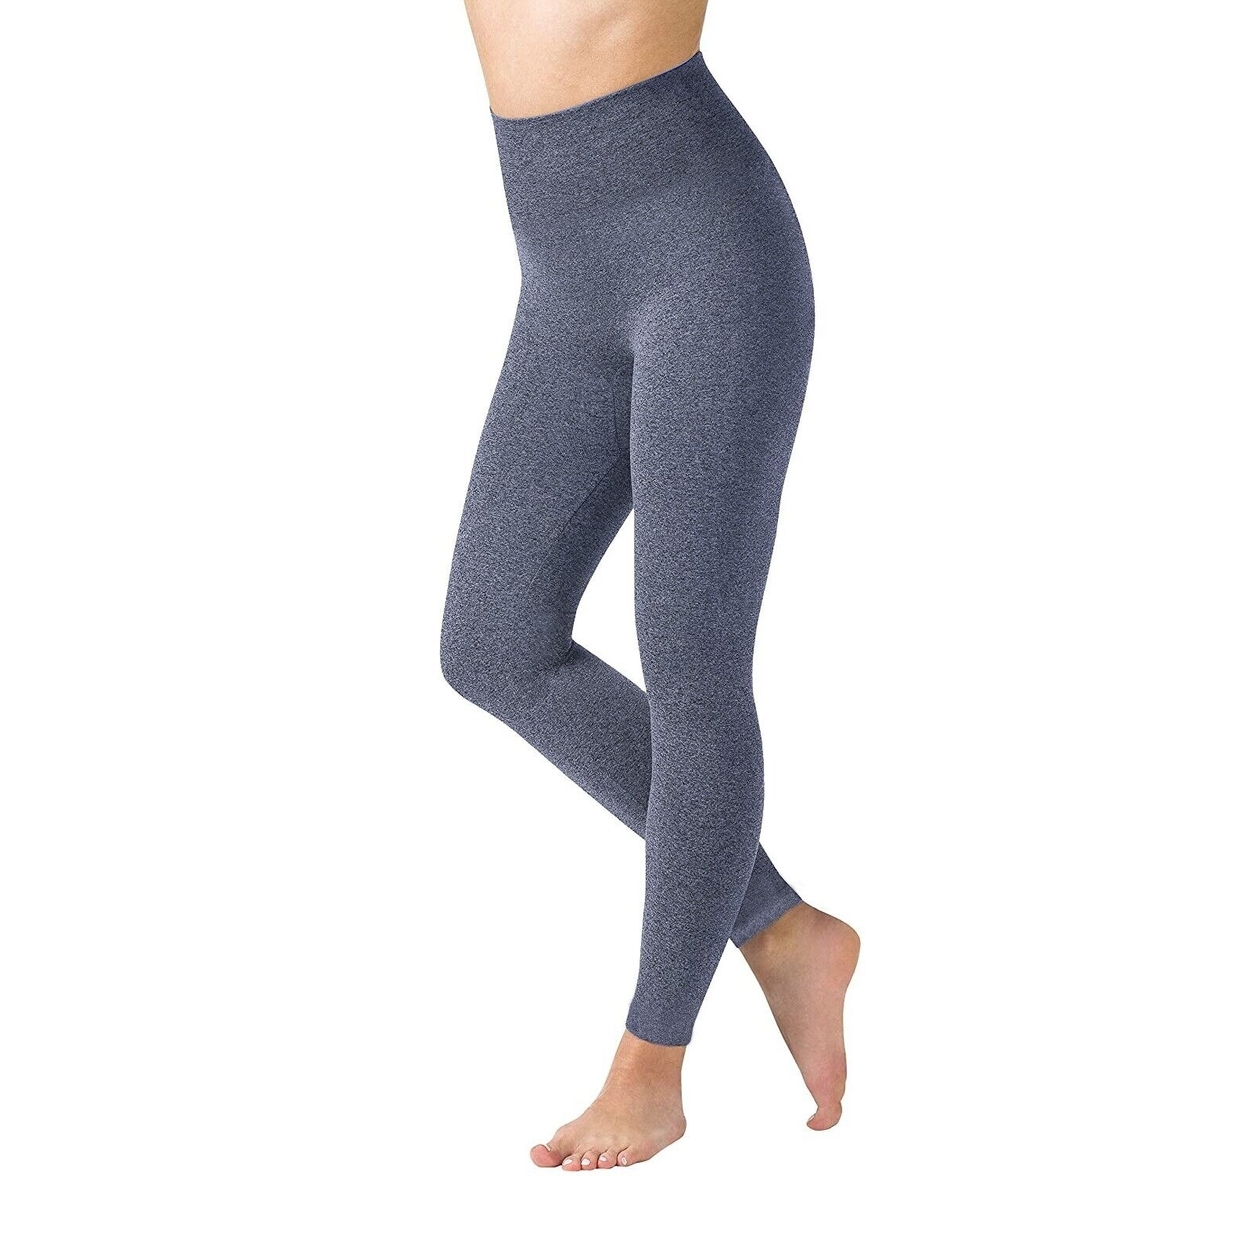 Women's Winter Warm Marled High Waist Fleece Lined Thick Thermal Leggings Pants - Navy, 1x